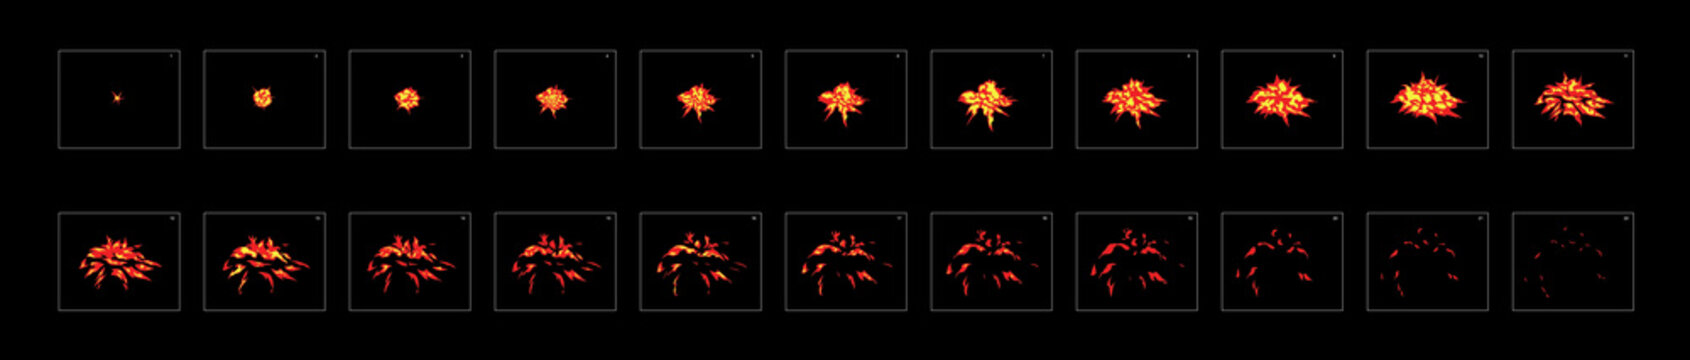 Fire blast effect. fire explosion effect for animation. Effect for game design, motion graphic, animation or something else